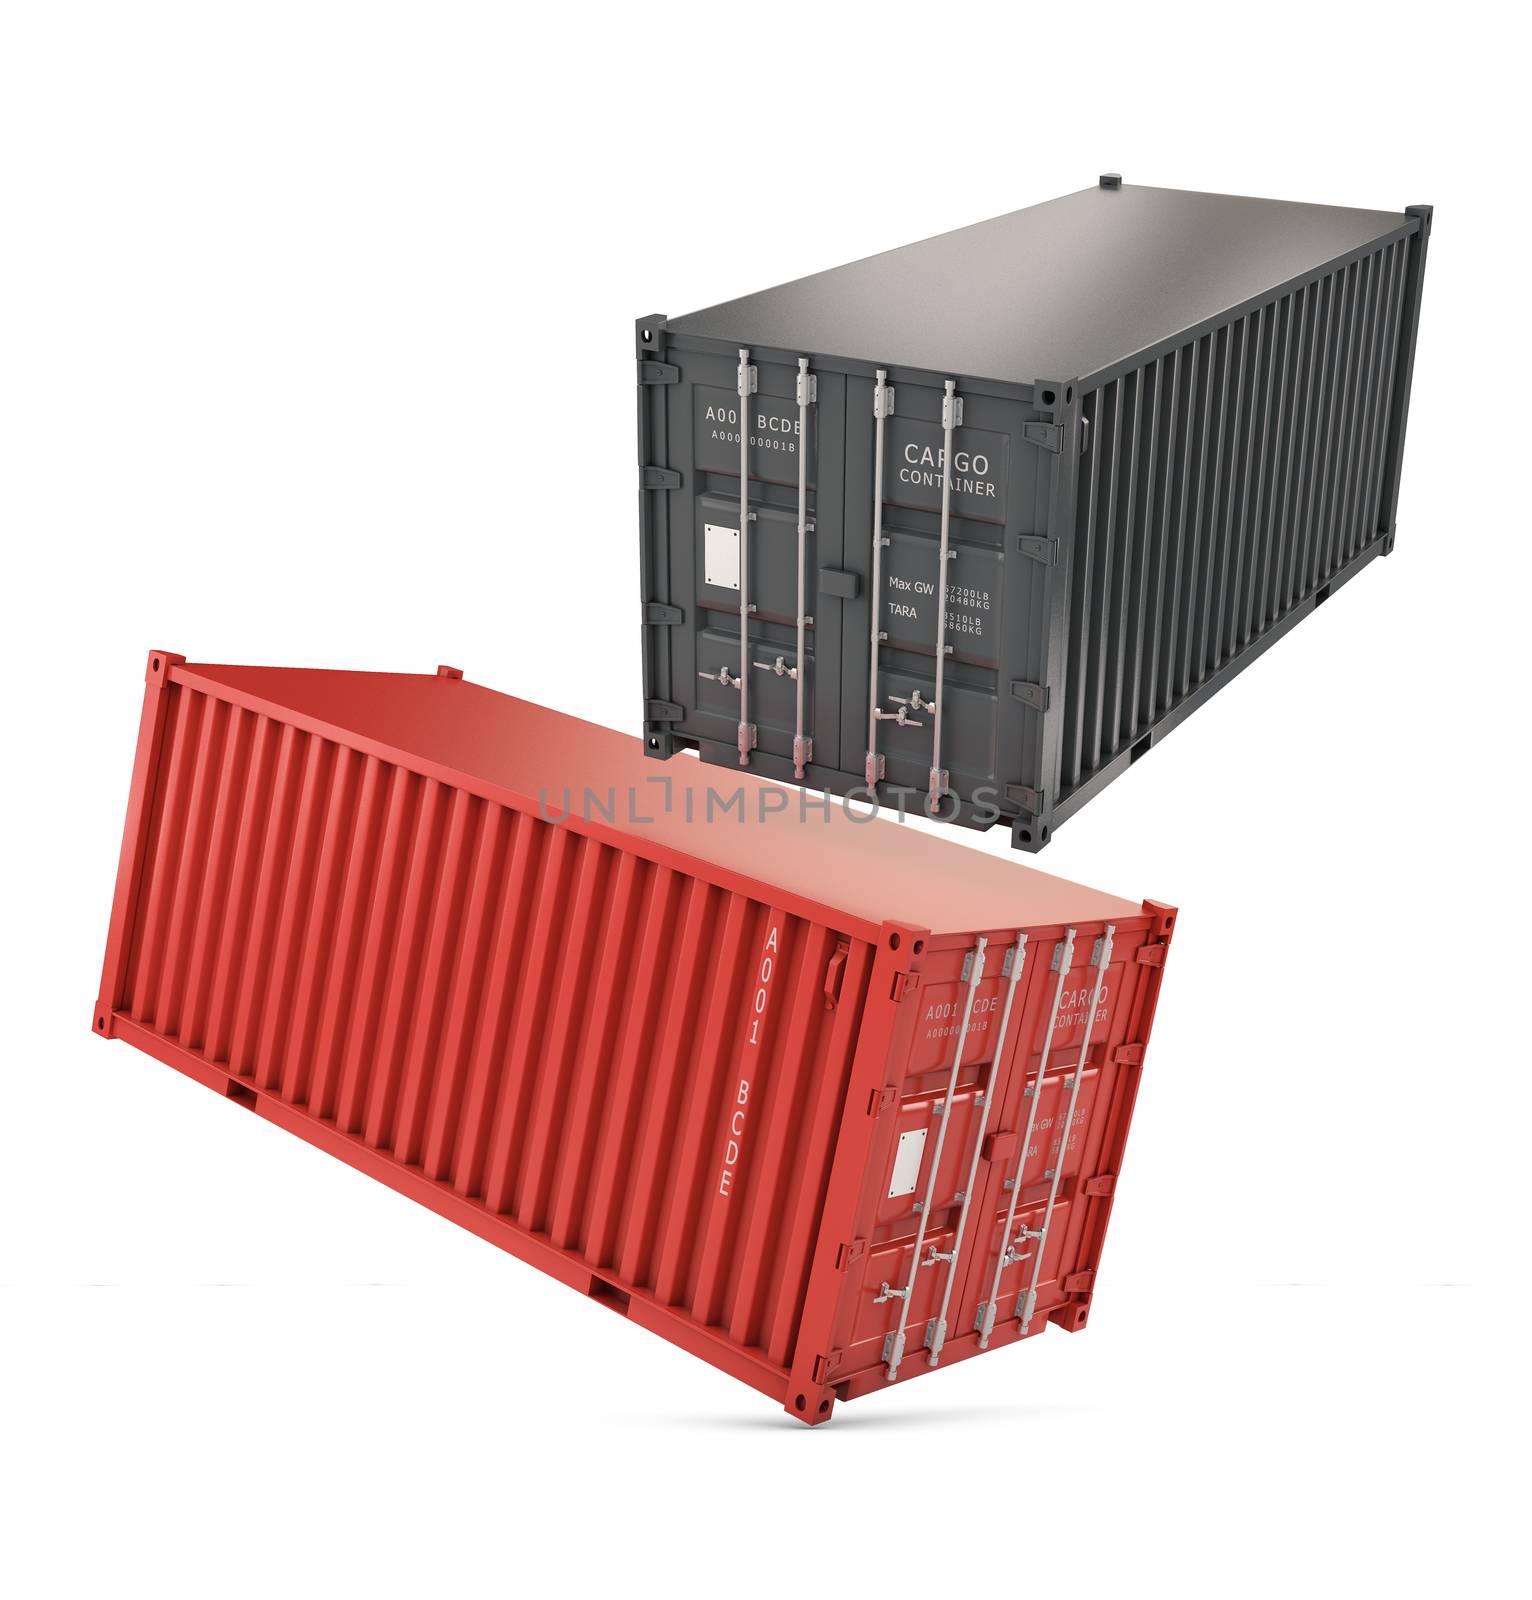 3d Illustration of a stack of two sea freight containers, isolated on white background.